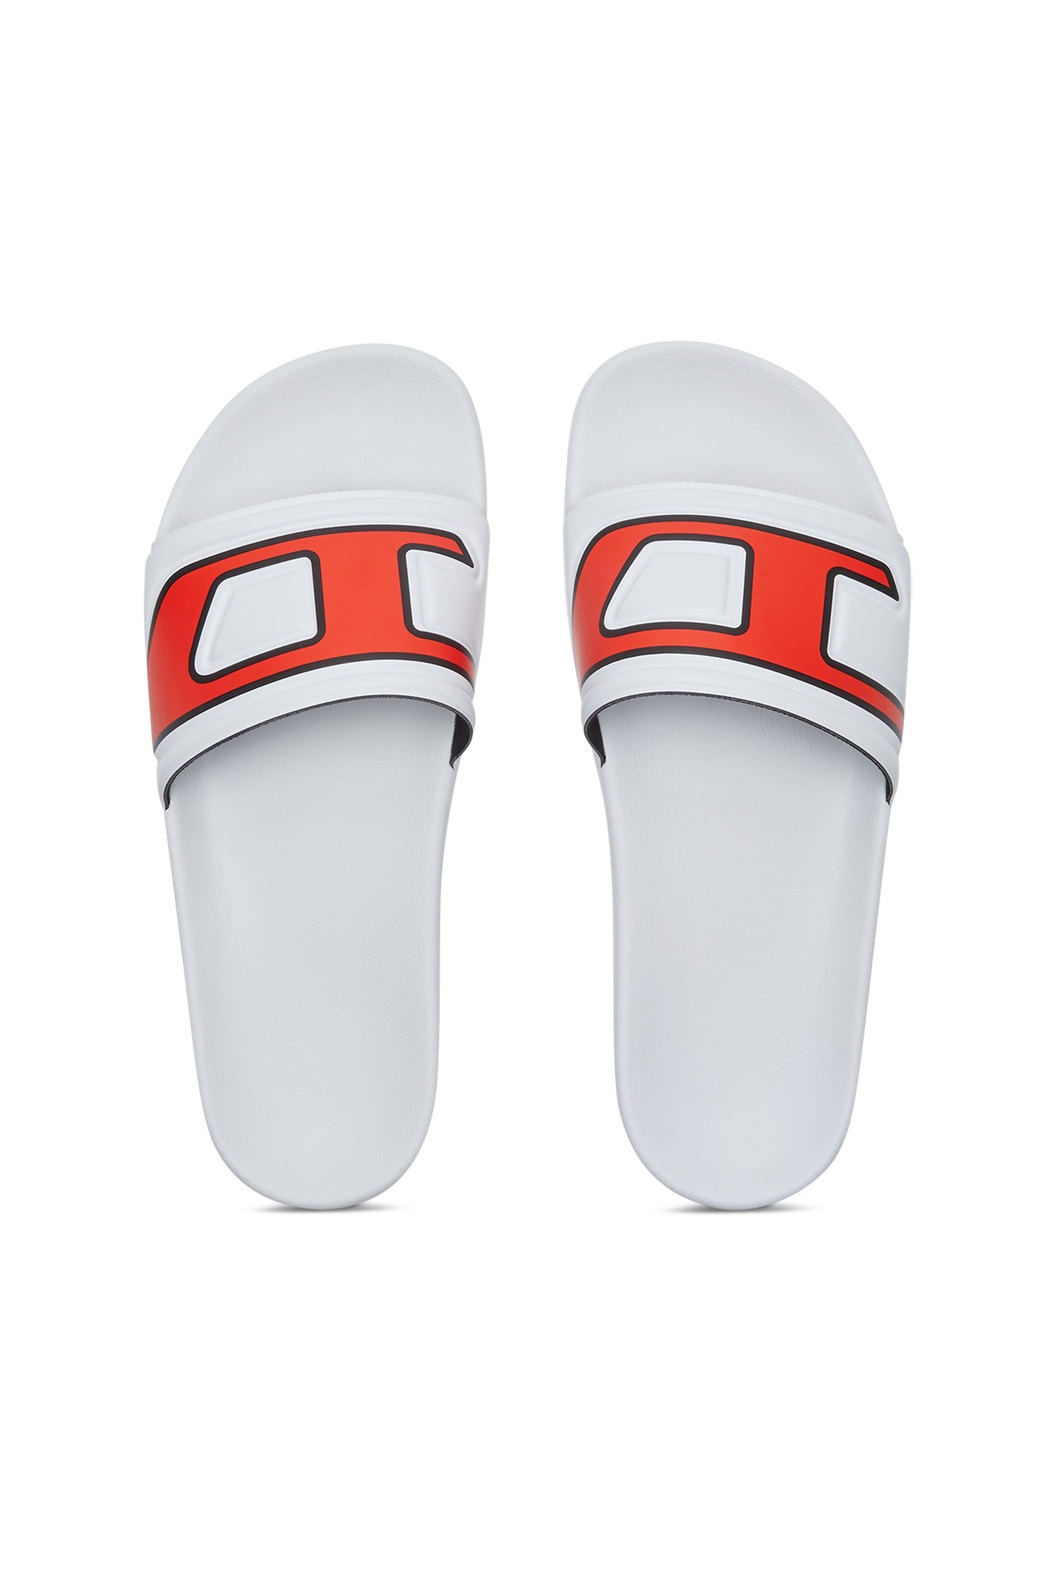 Sa-Mayemi D - Pool slides with embedded D logo